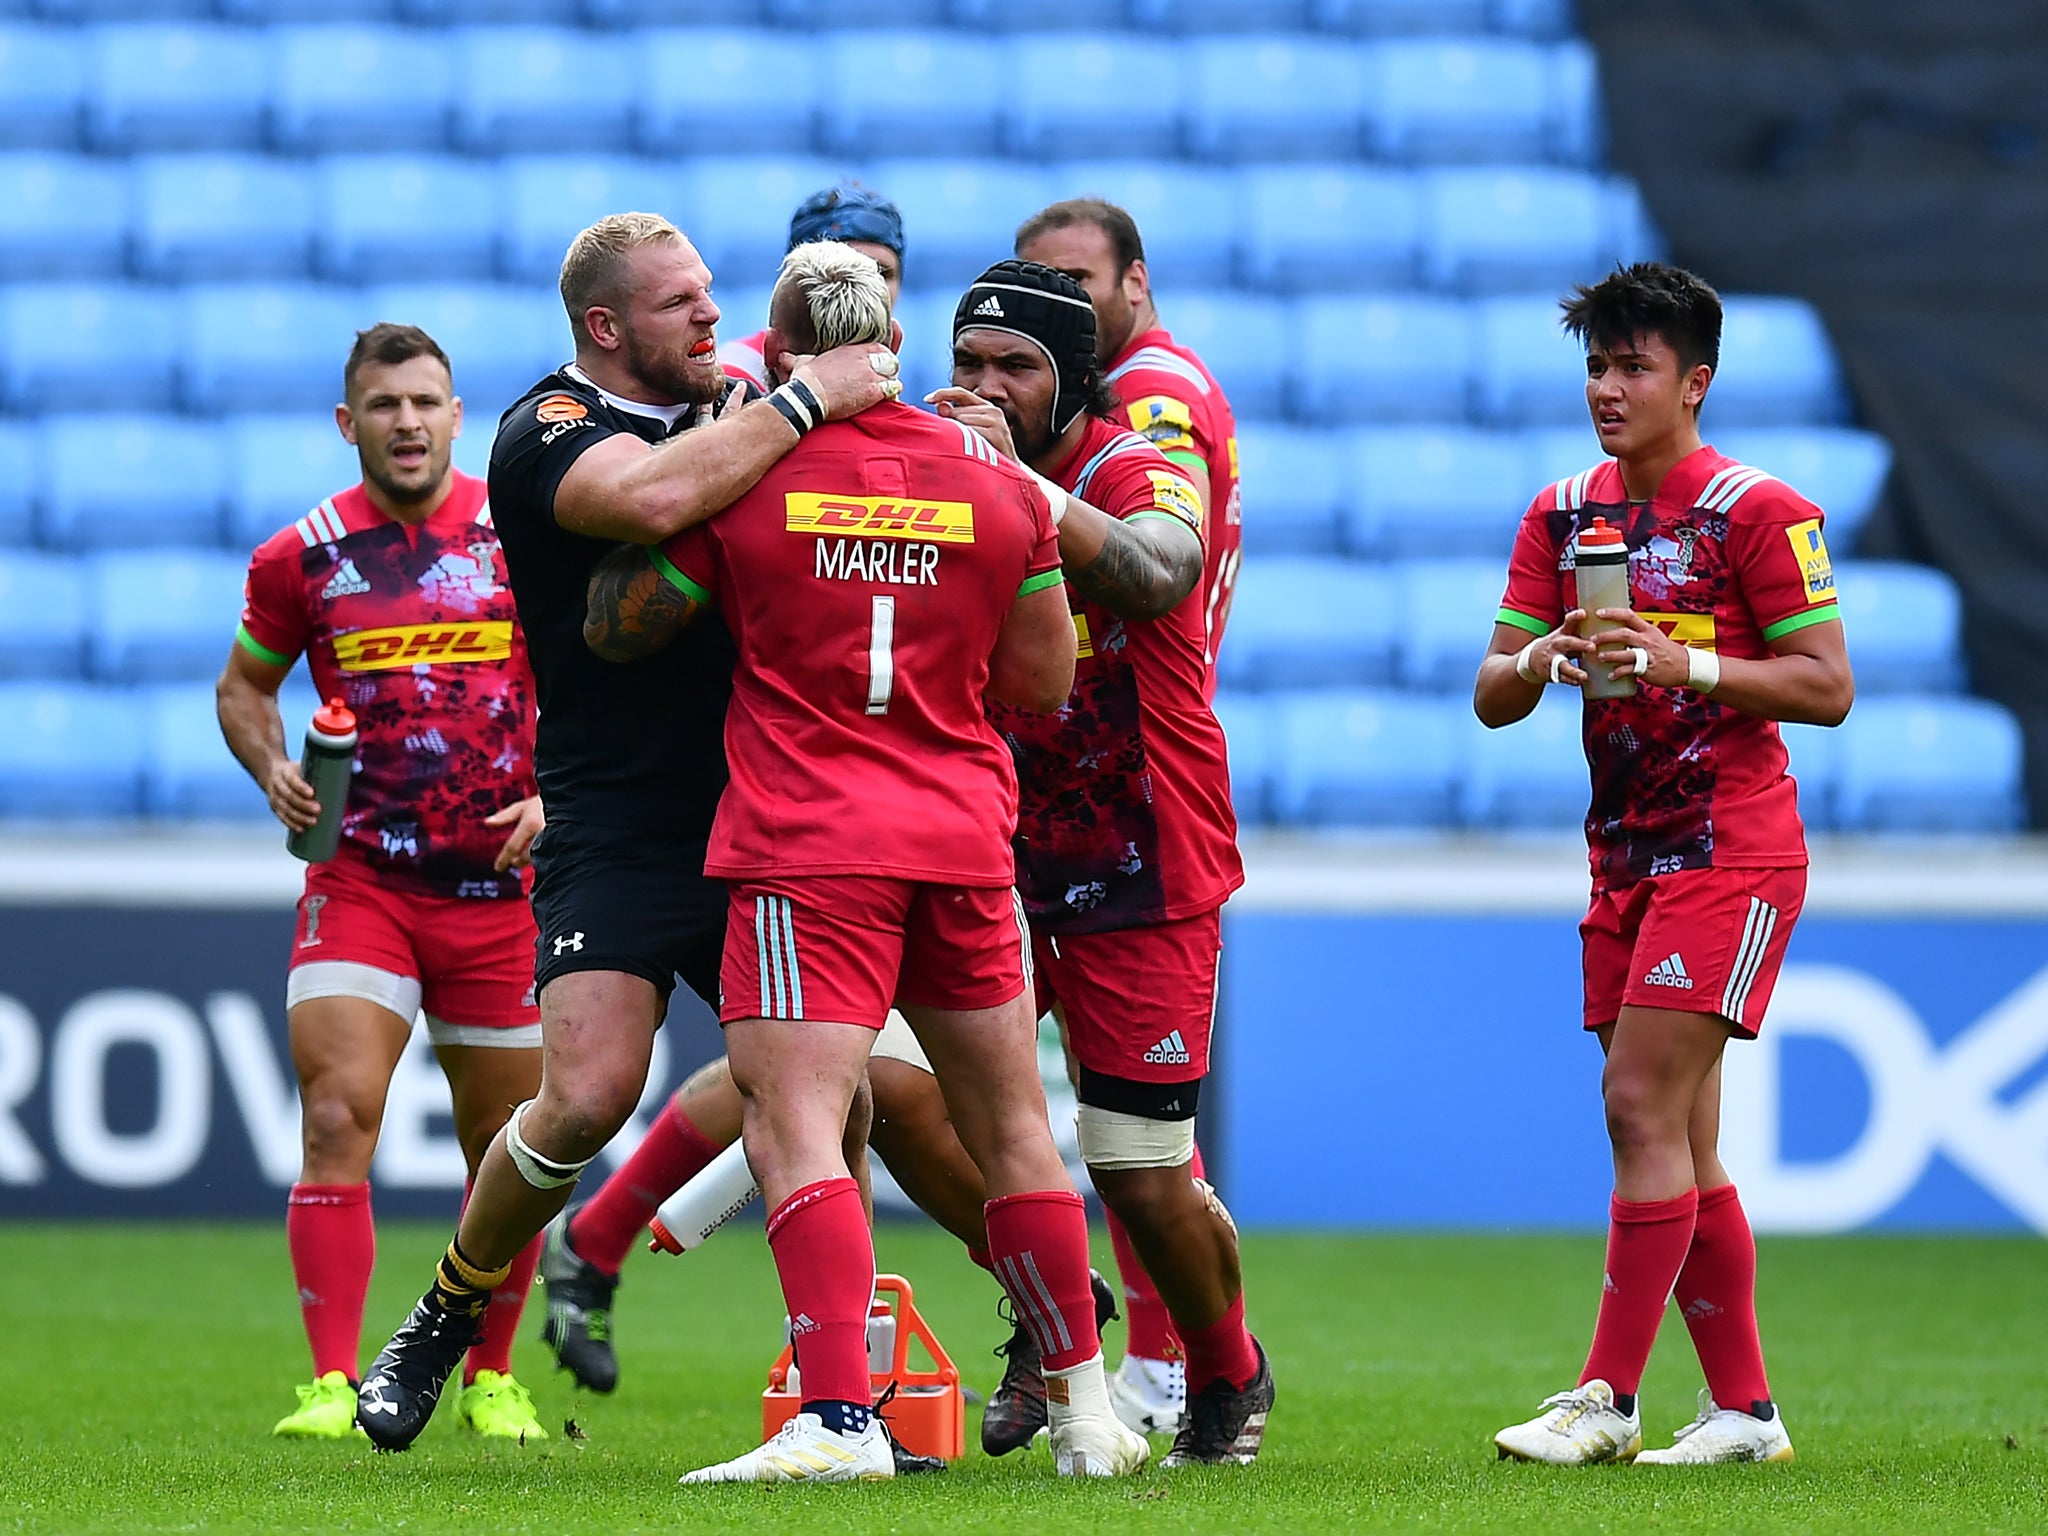 James Haskell choked Joe Marler in reaction to being sprayed by water